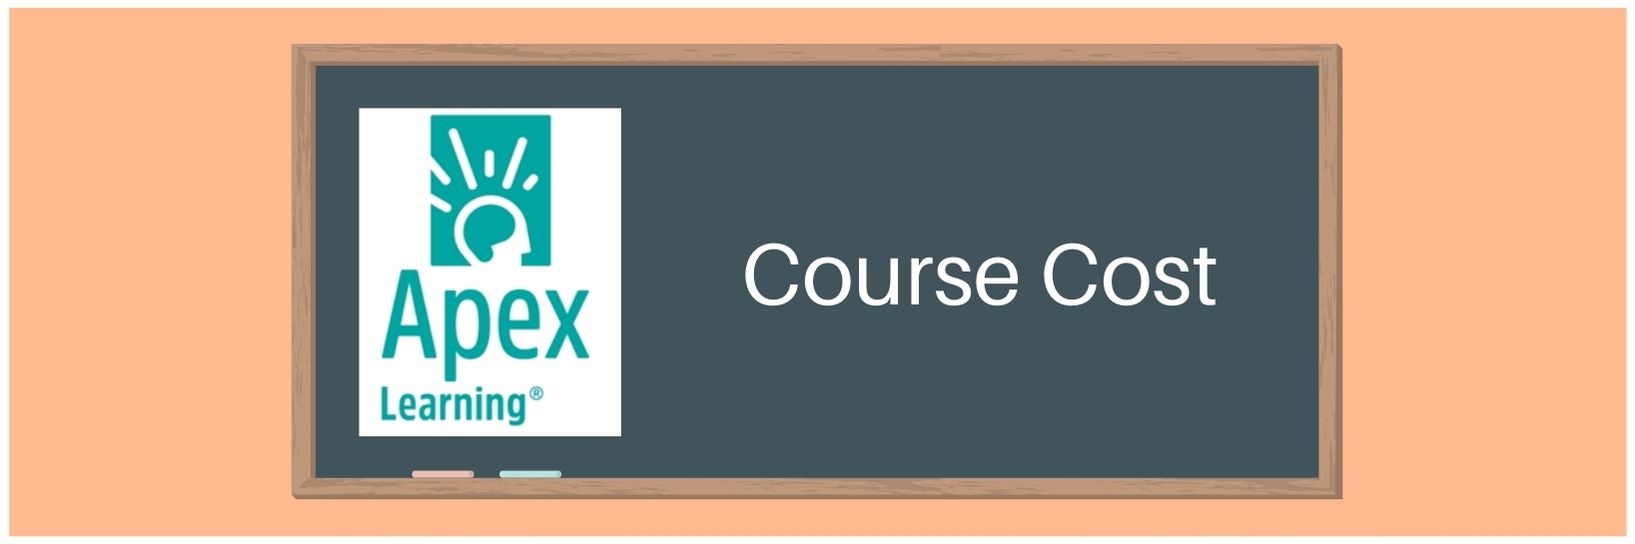 introduction to business and technology apex learning fit